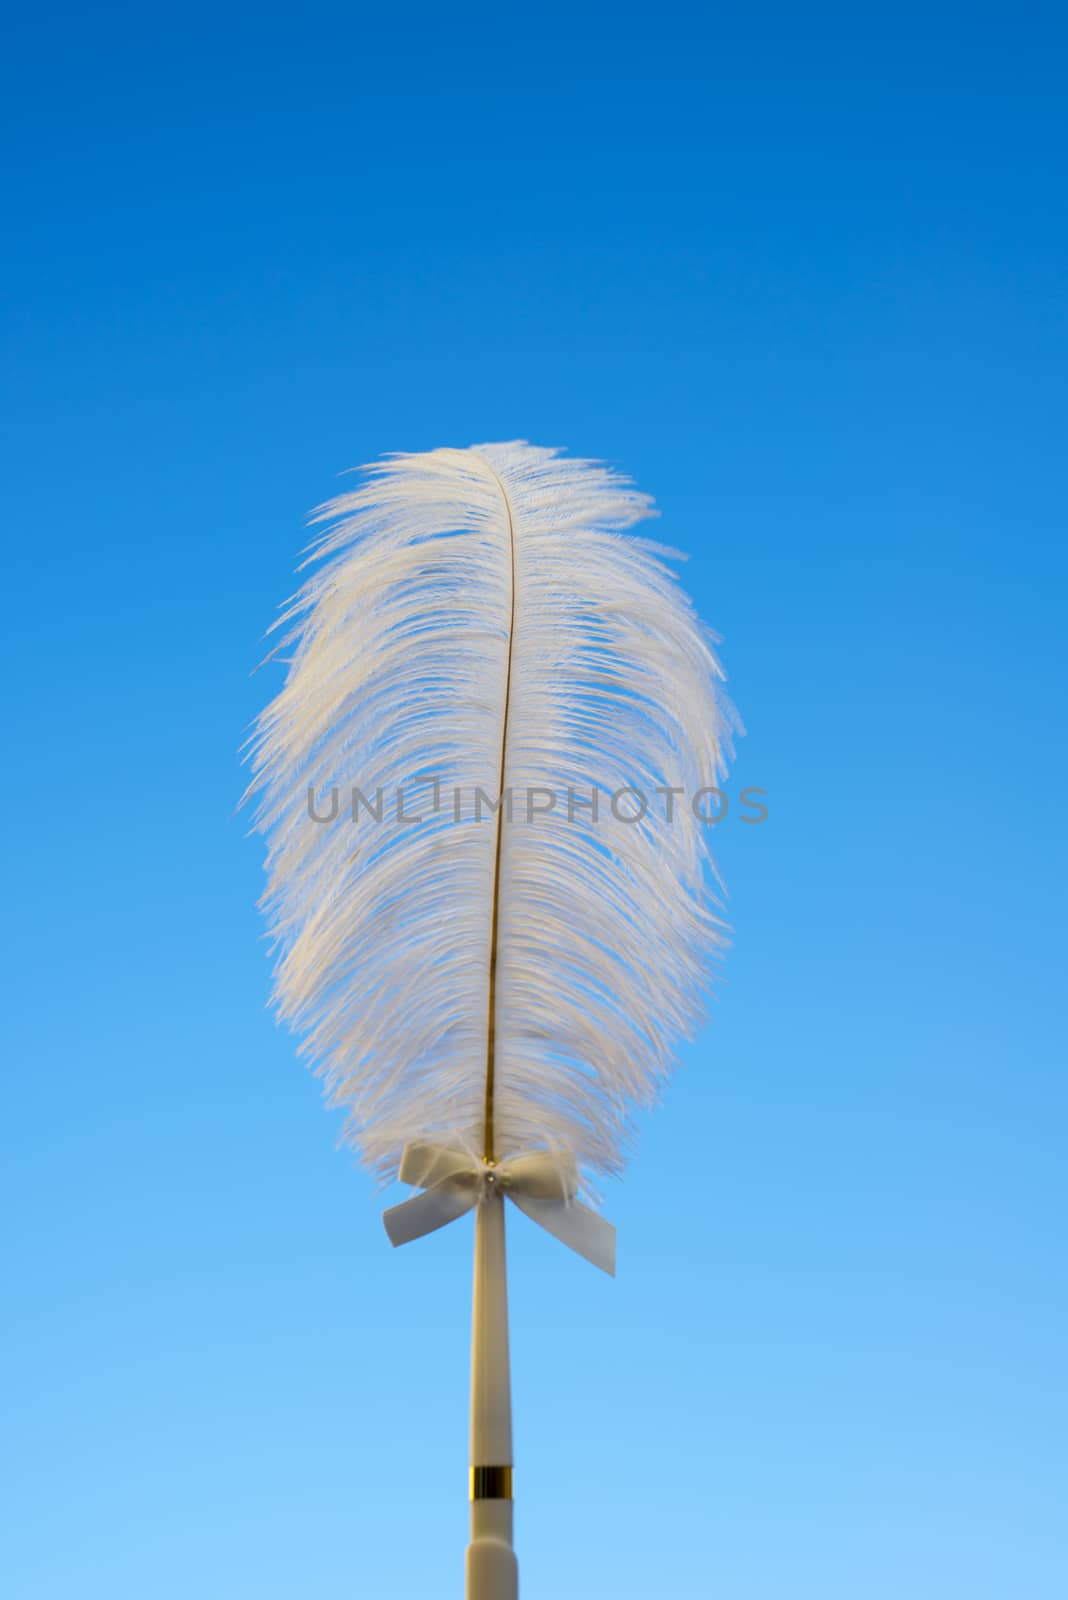 sky blue background with a white feather